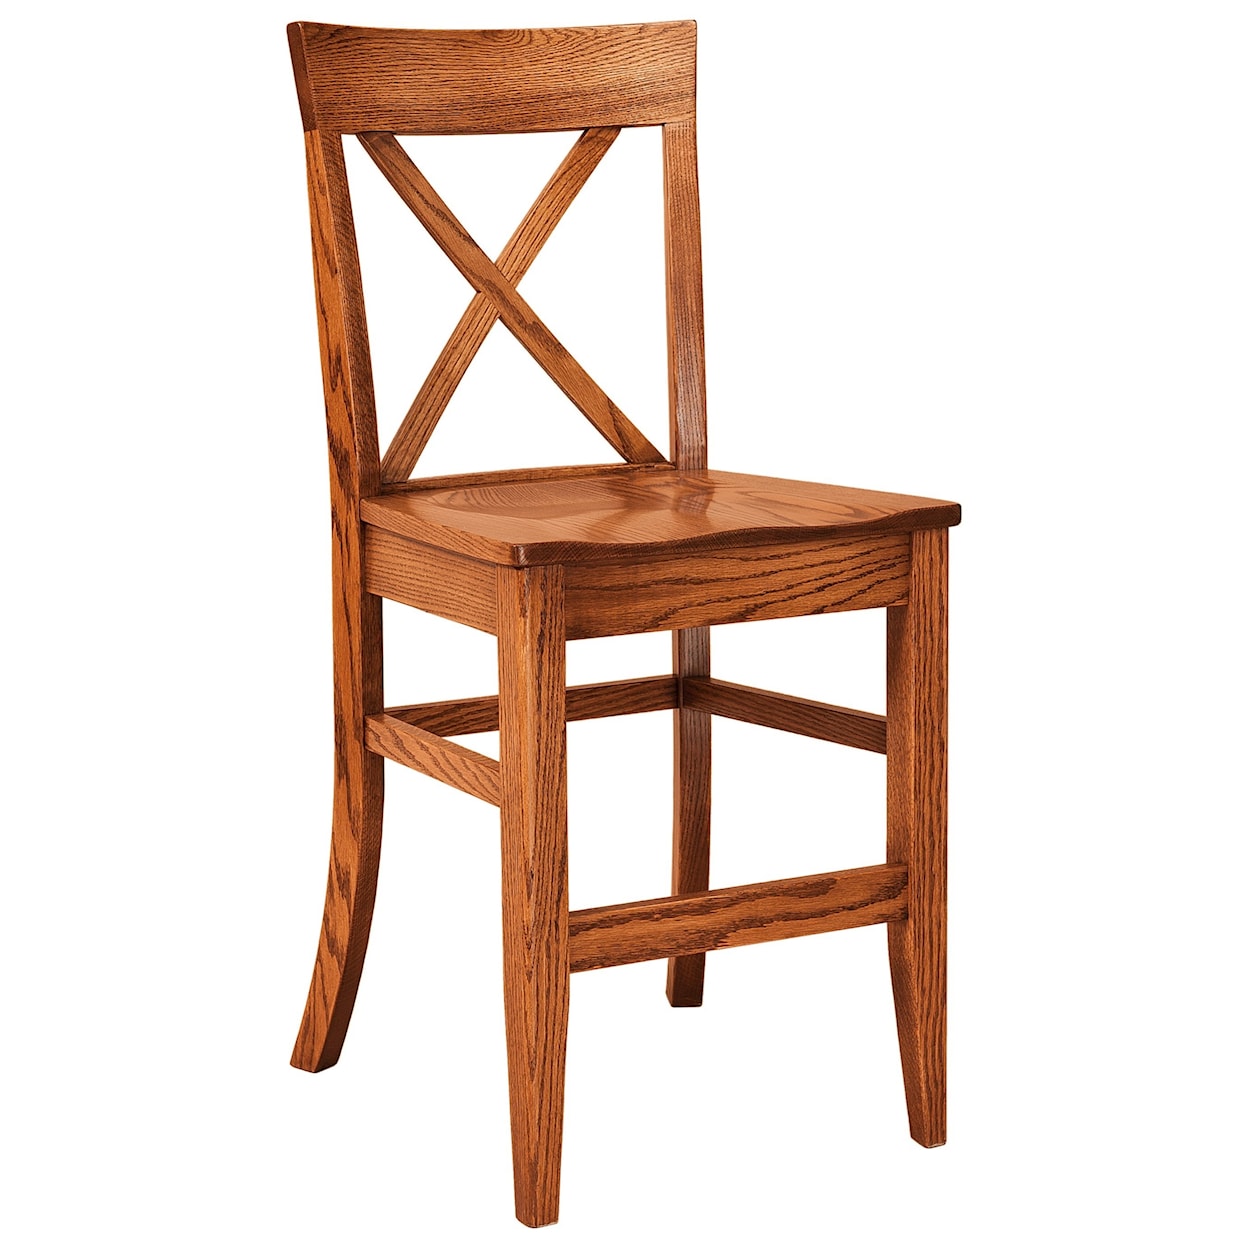 F&N Woodworking Frontier Stationary Counter Height Stool - Wood Seat